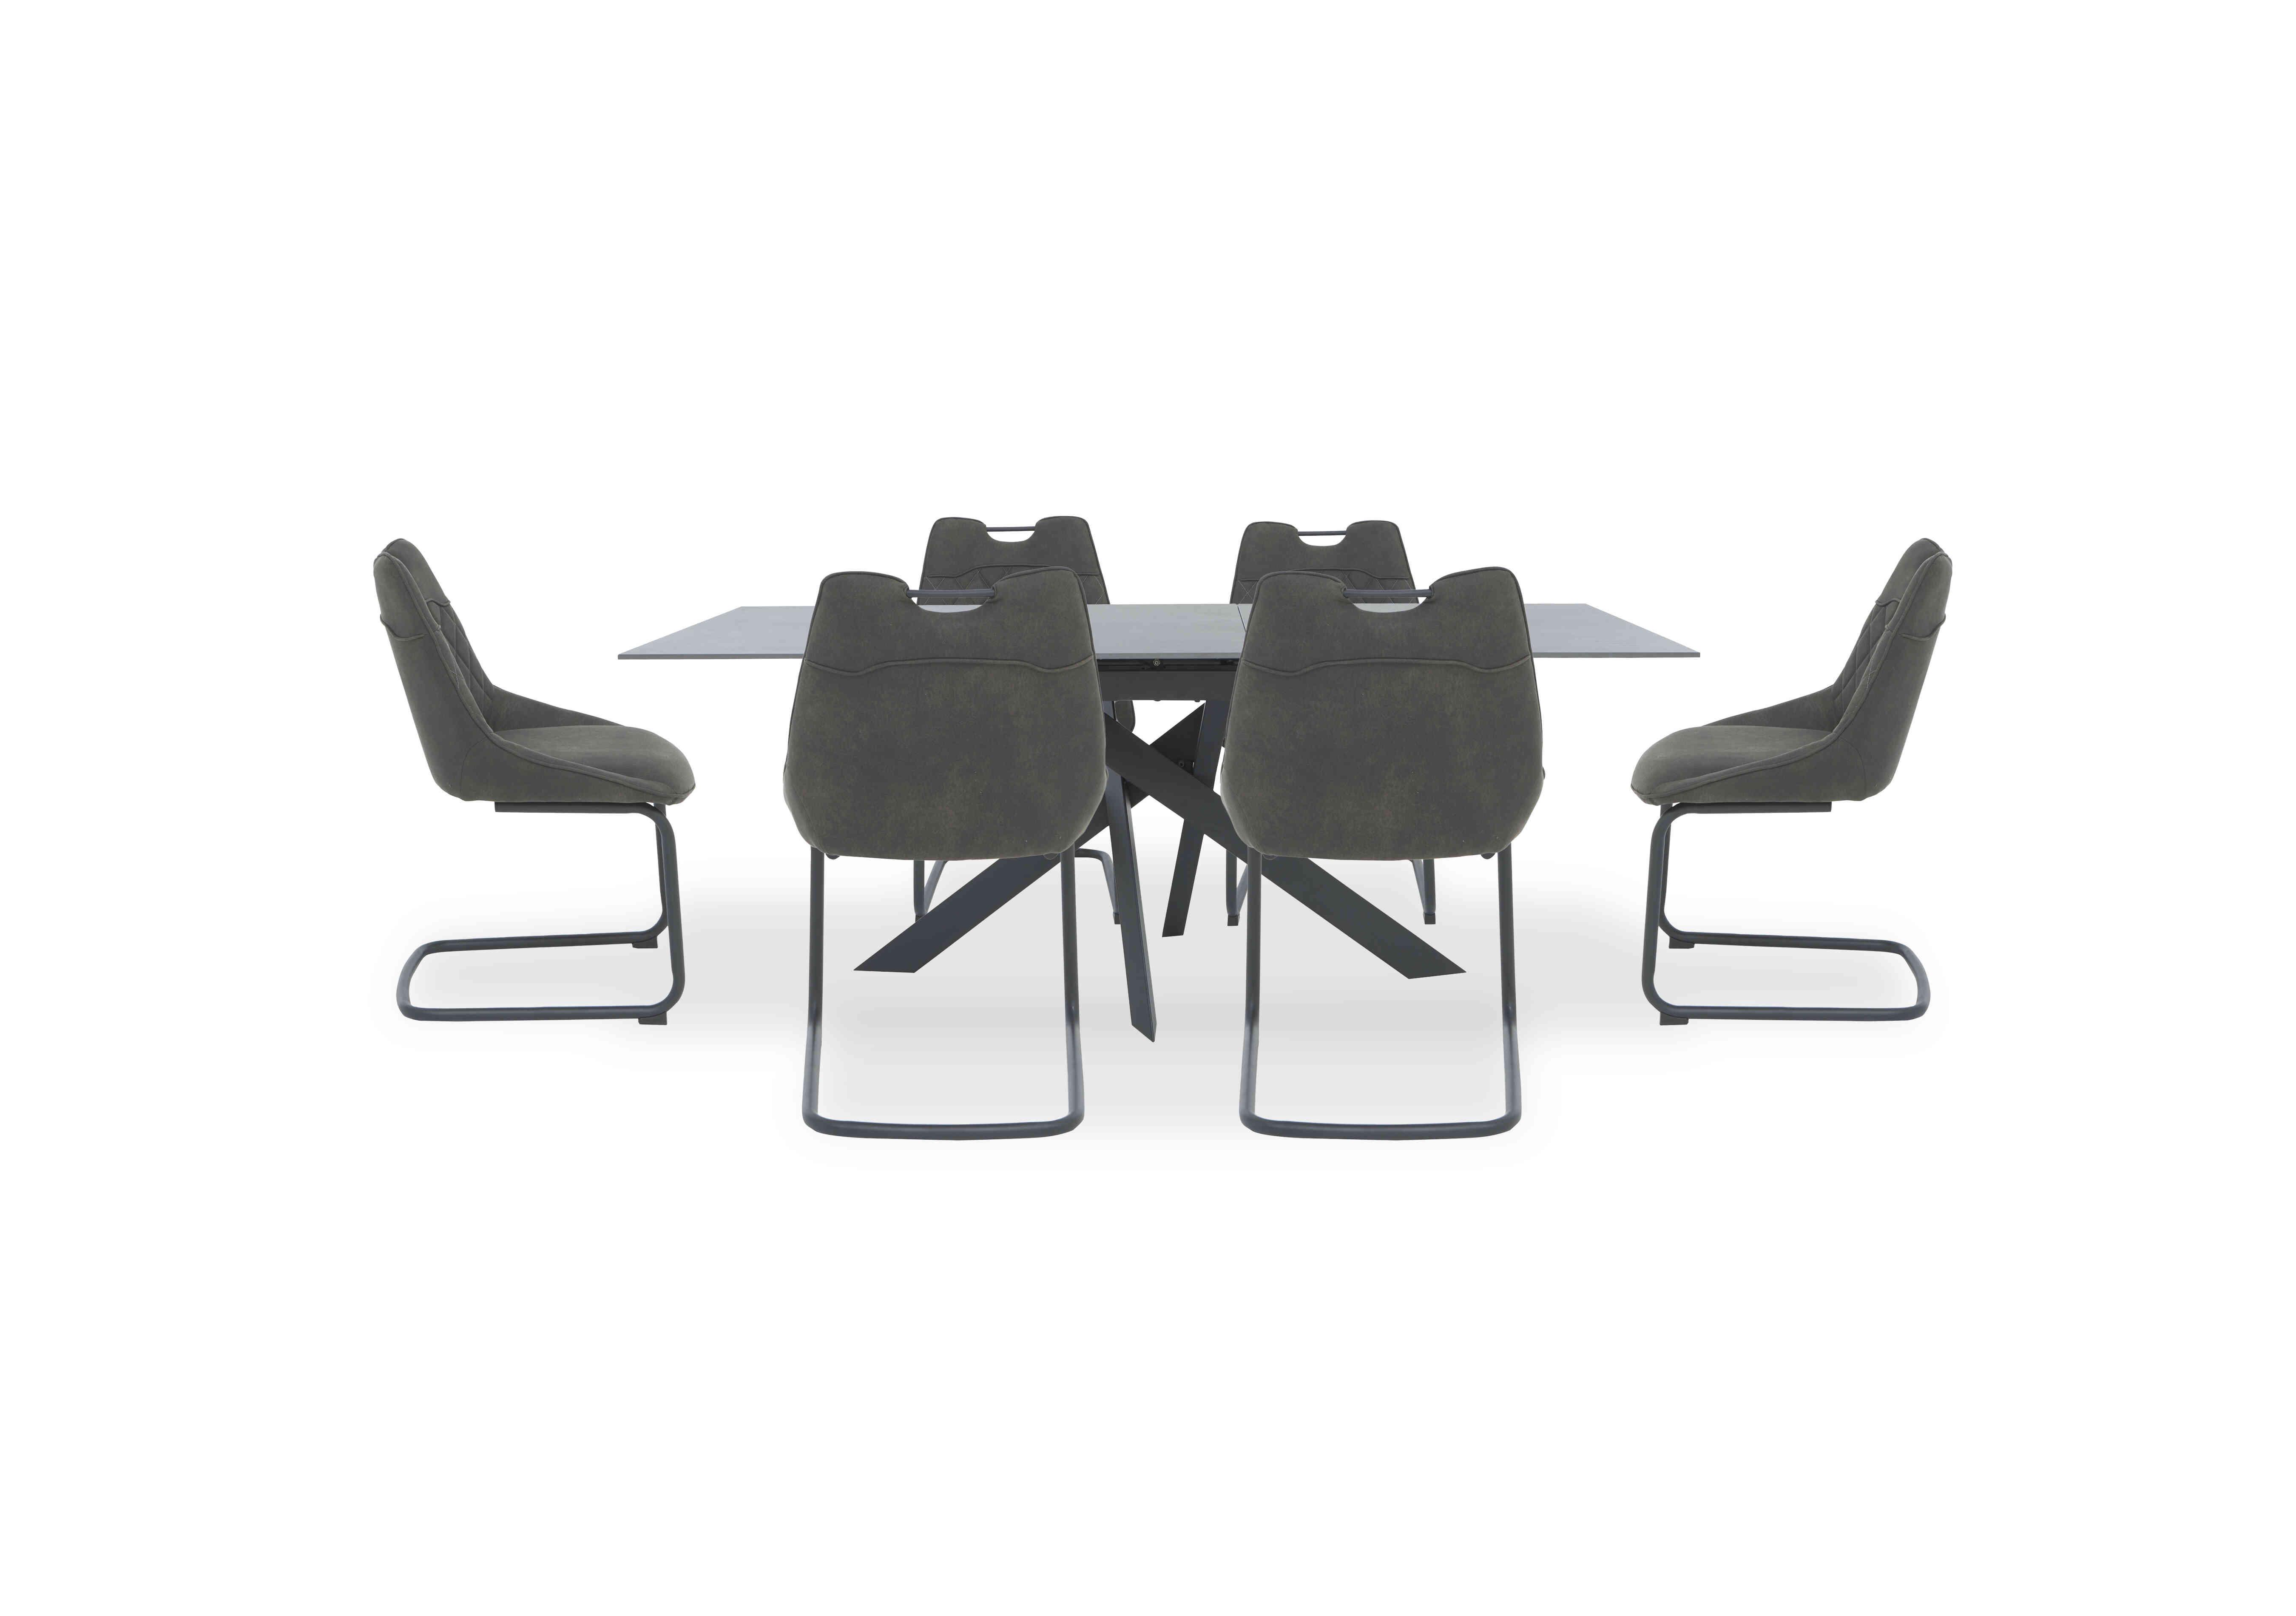 Warrior Grey Extending Dining Table with 6 Cantilever Dining Chairs in Grey/Grey on Furniture Village